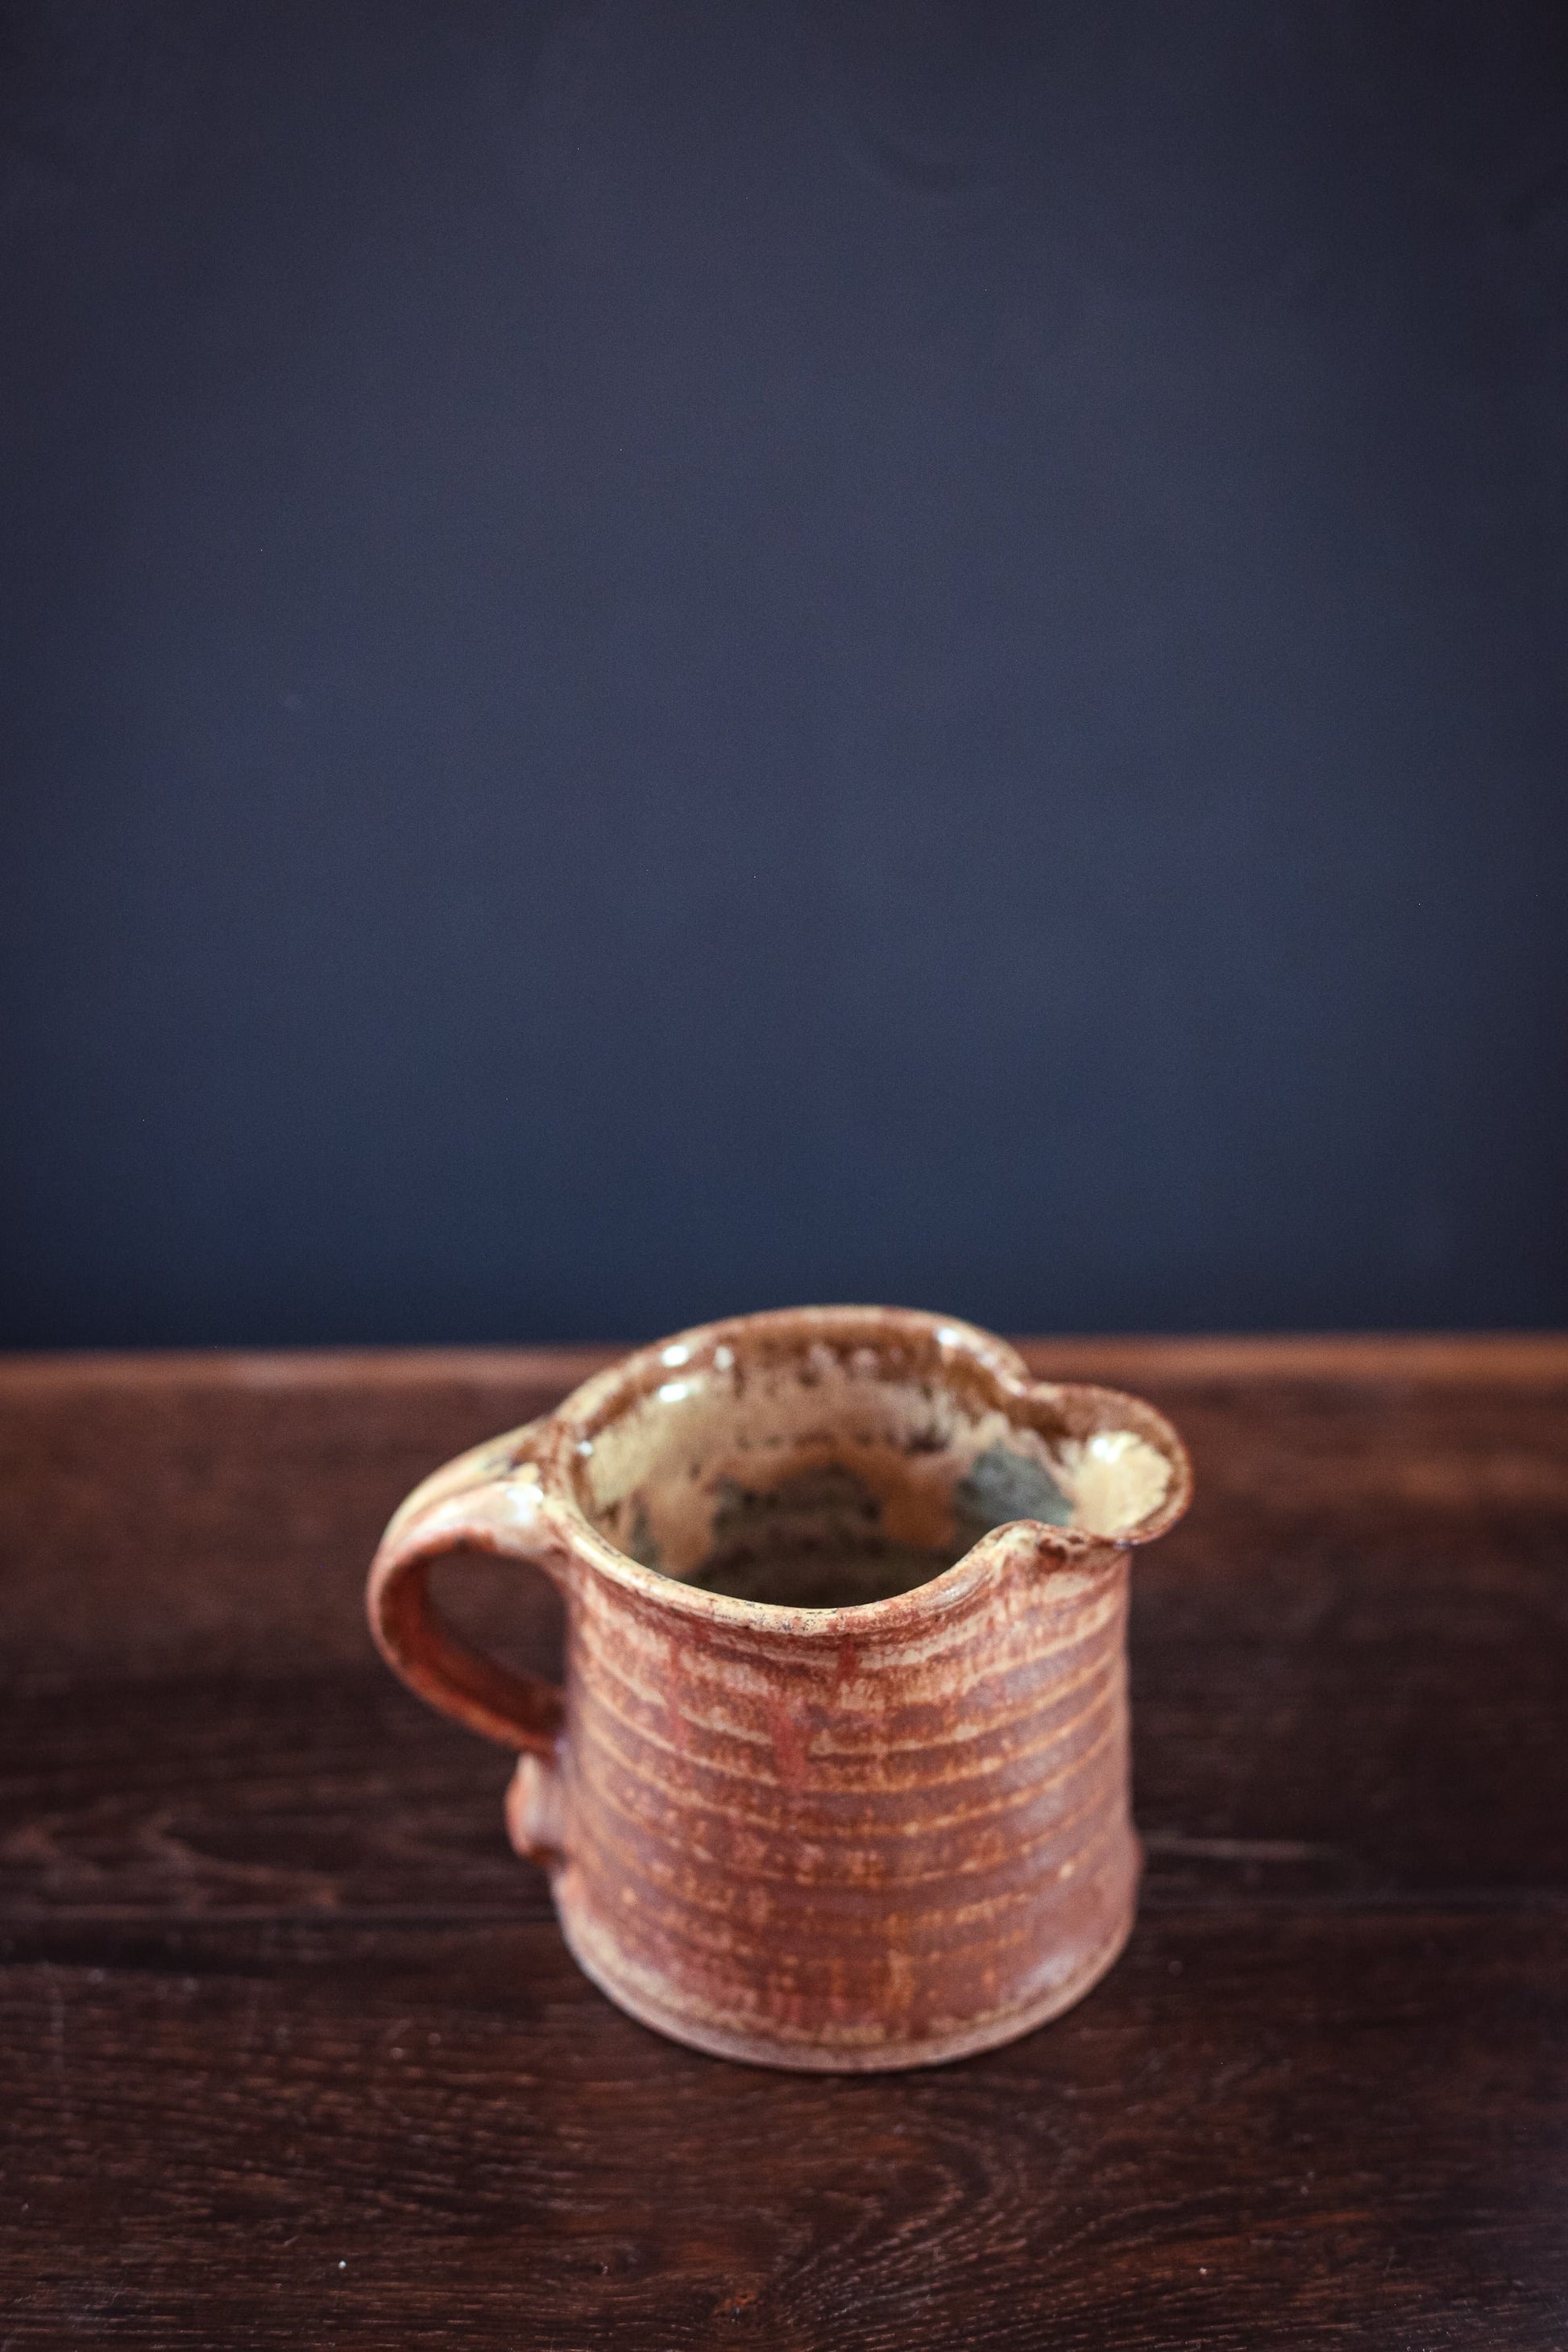 Hand Thrown Ceramic Mug/Creamer in Drip and Speckled Glaze - Vintage Studio Pottery Cup